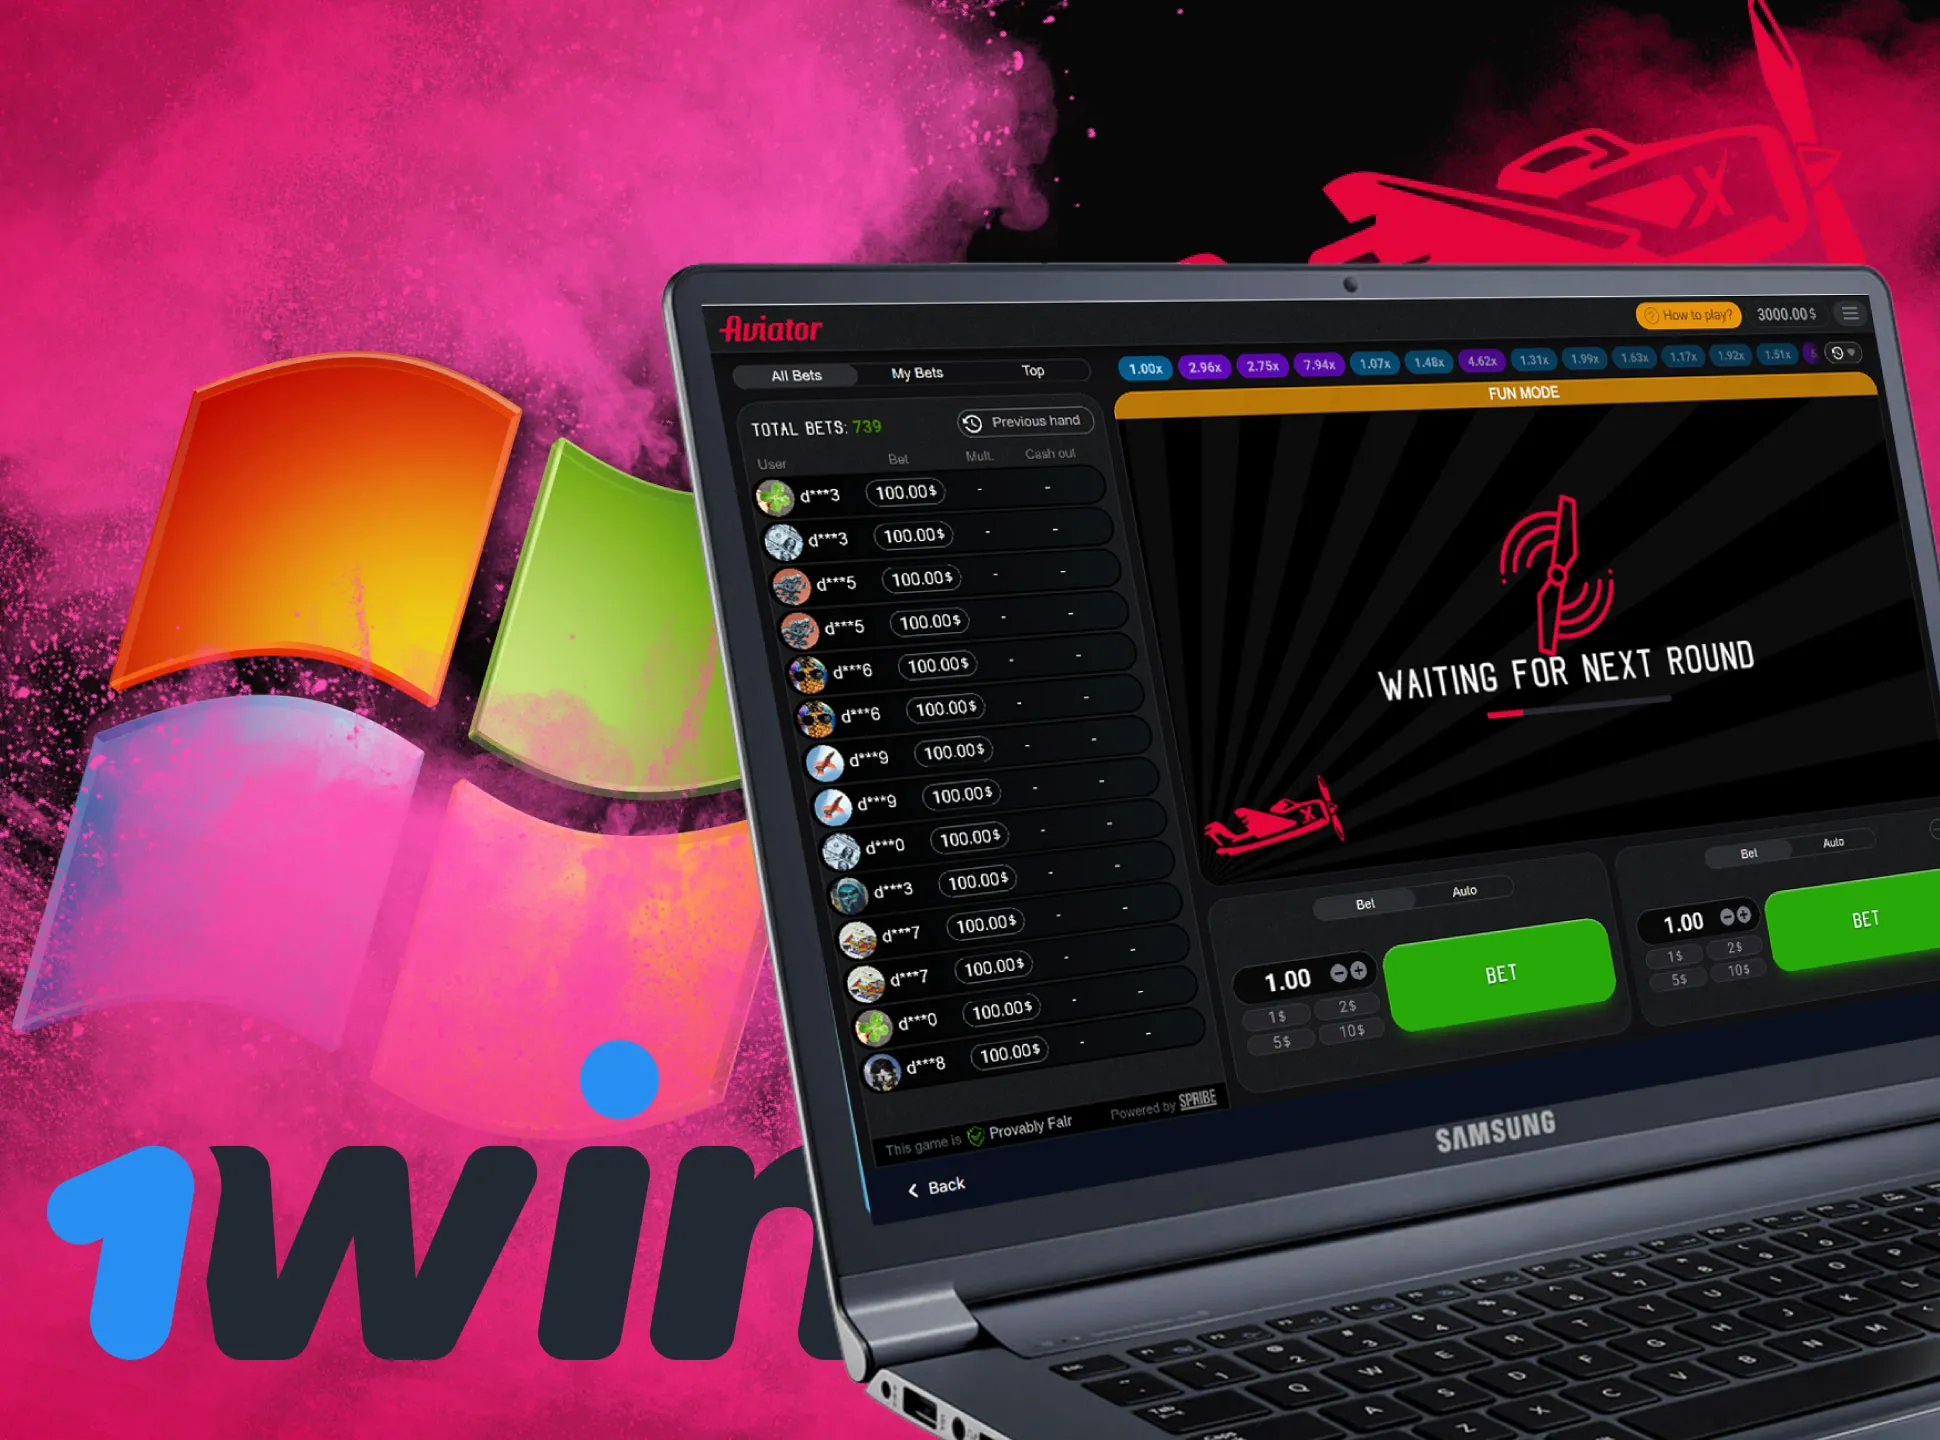 There is also the 1win desktop app for your laptop or PC.